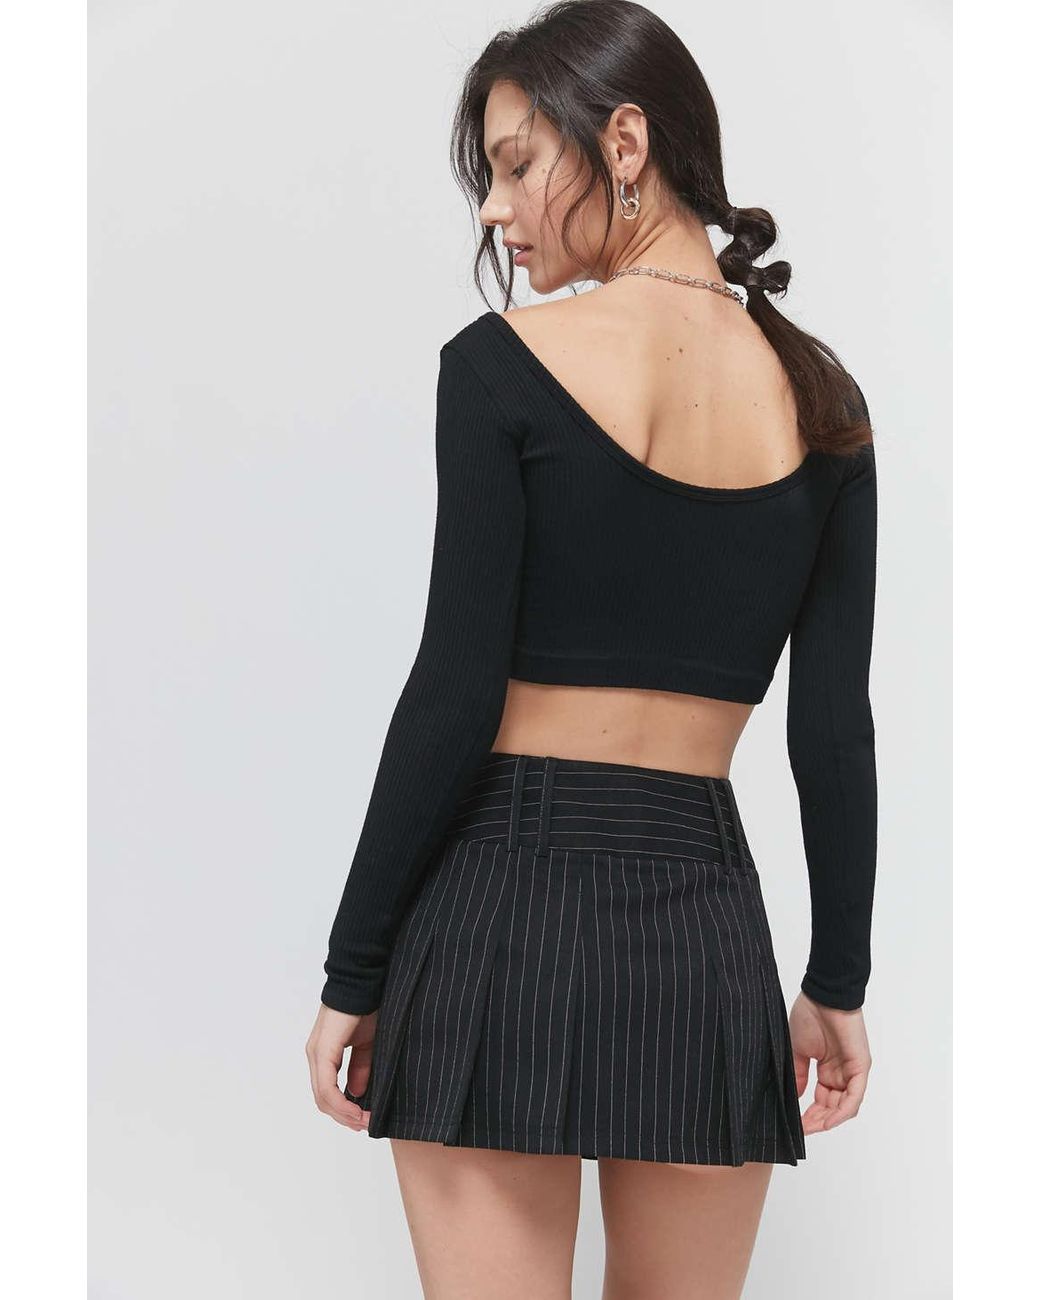 Urban Outfitters Uo Kortney Pinstripe Pleated Micro Mini Skirt in Black |  Lyst